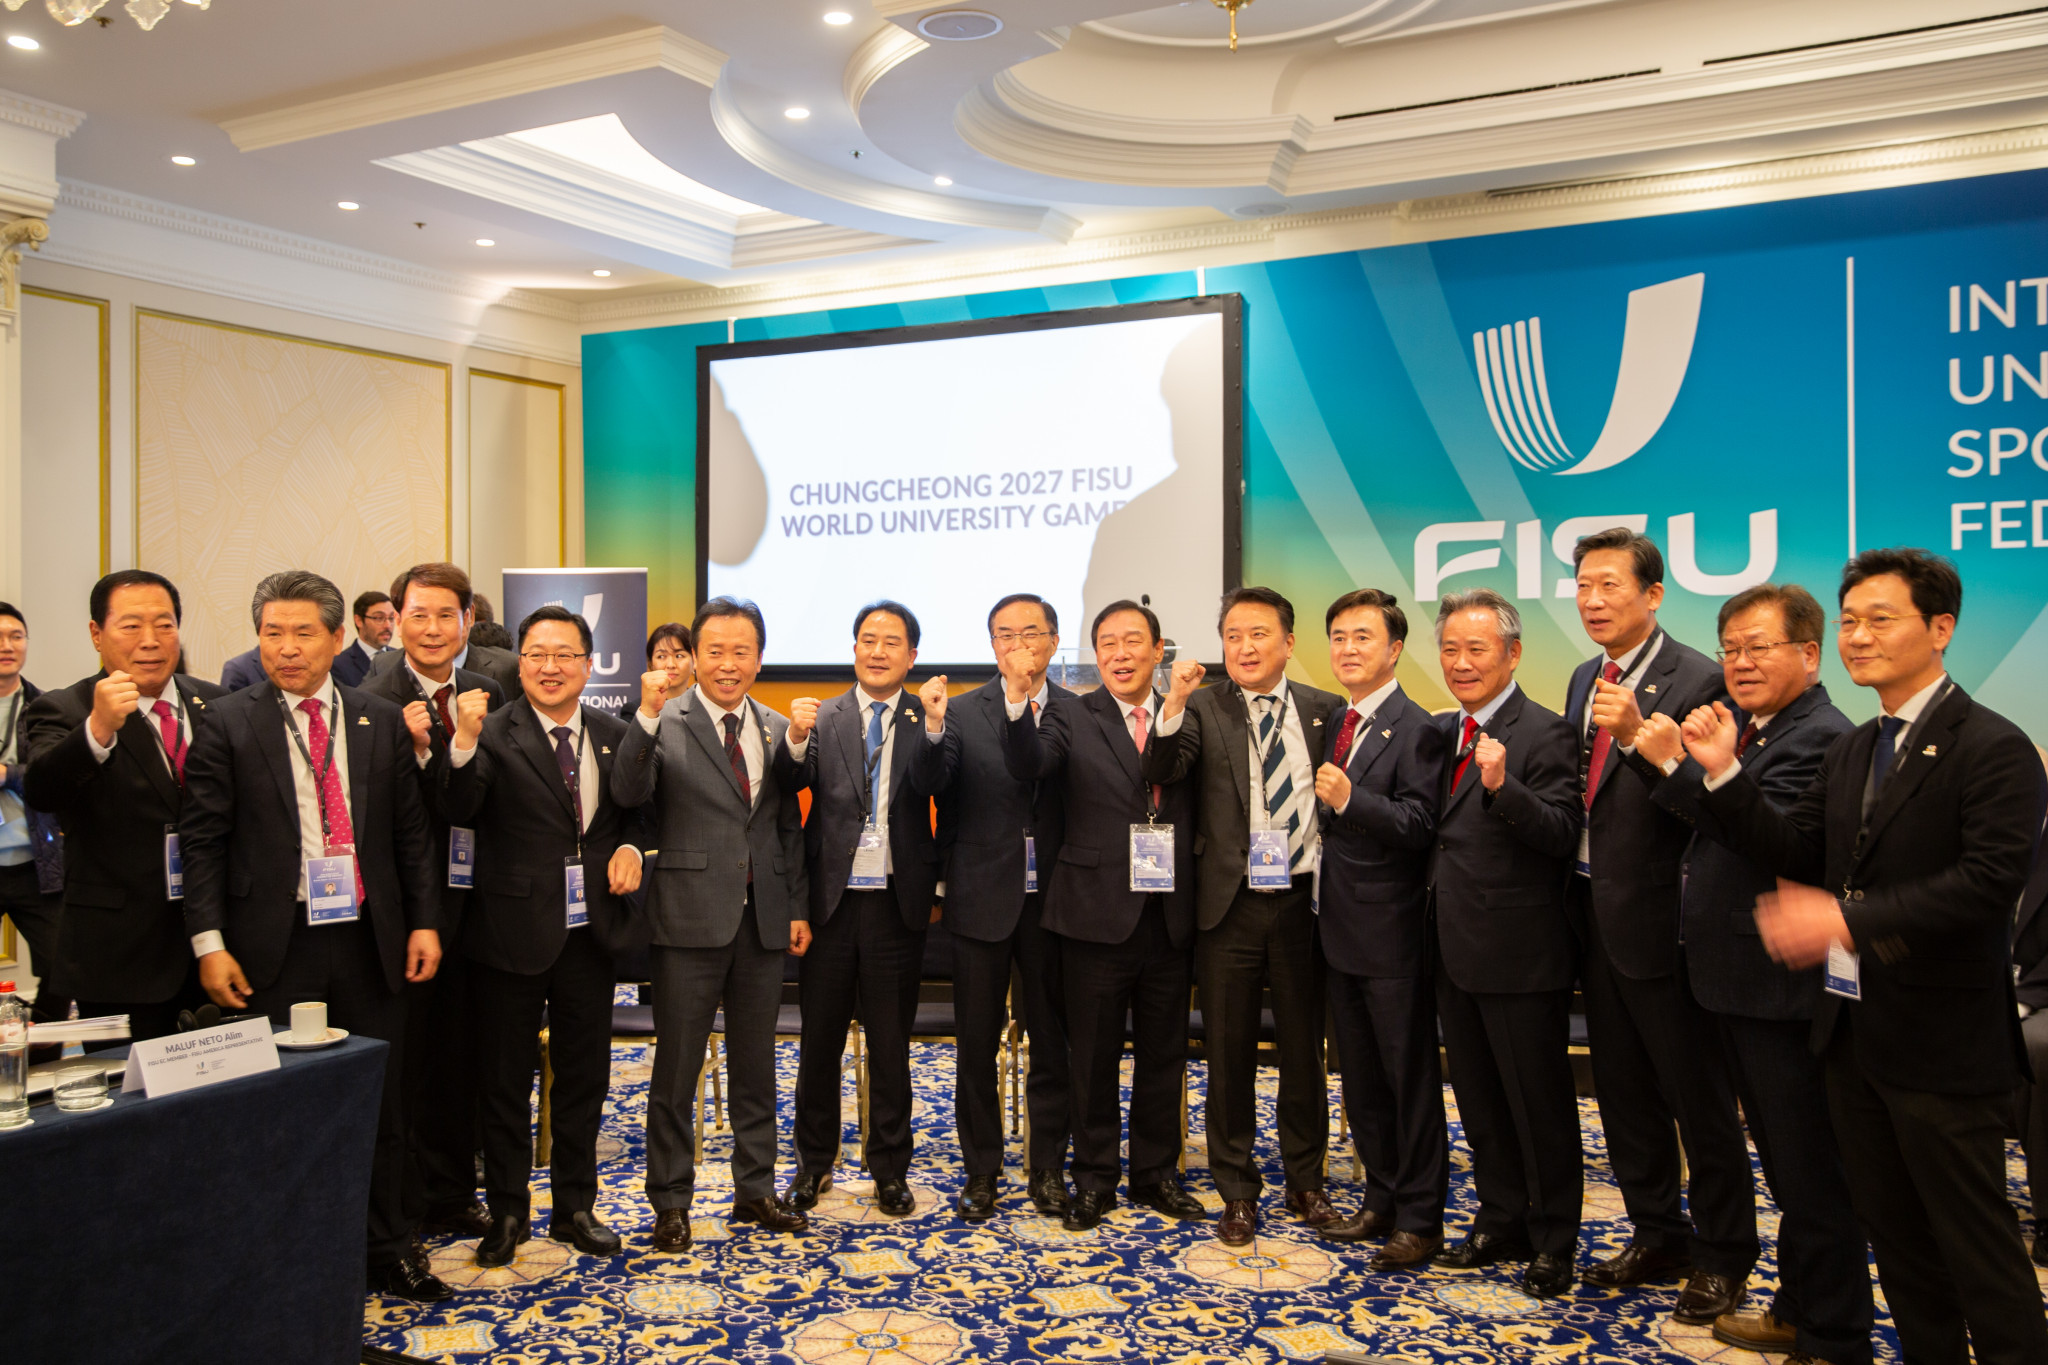 Chungcheong leaders express concern over lack of Organising Committee for 2027 FISU Games